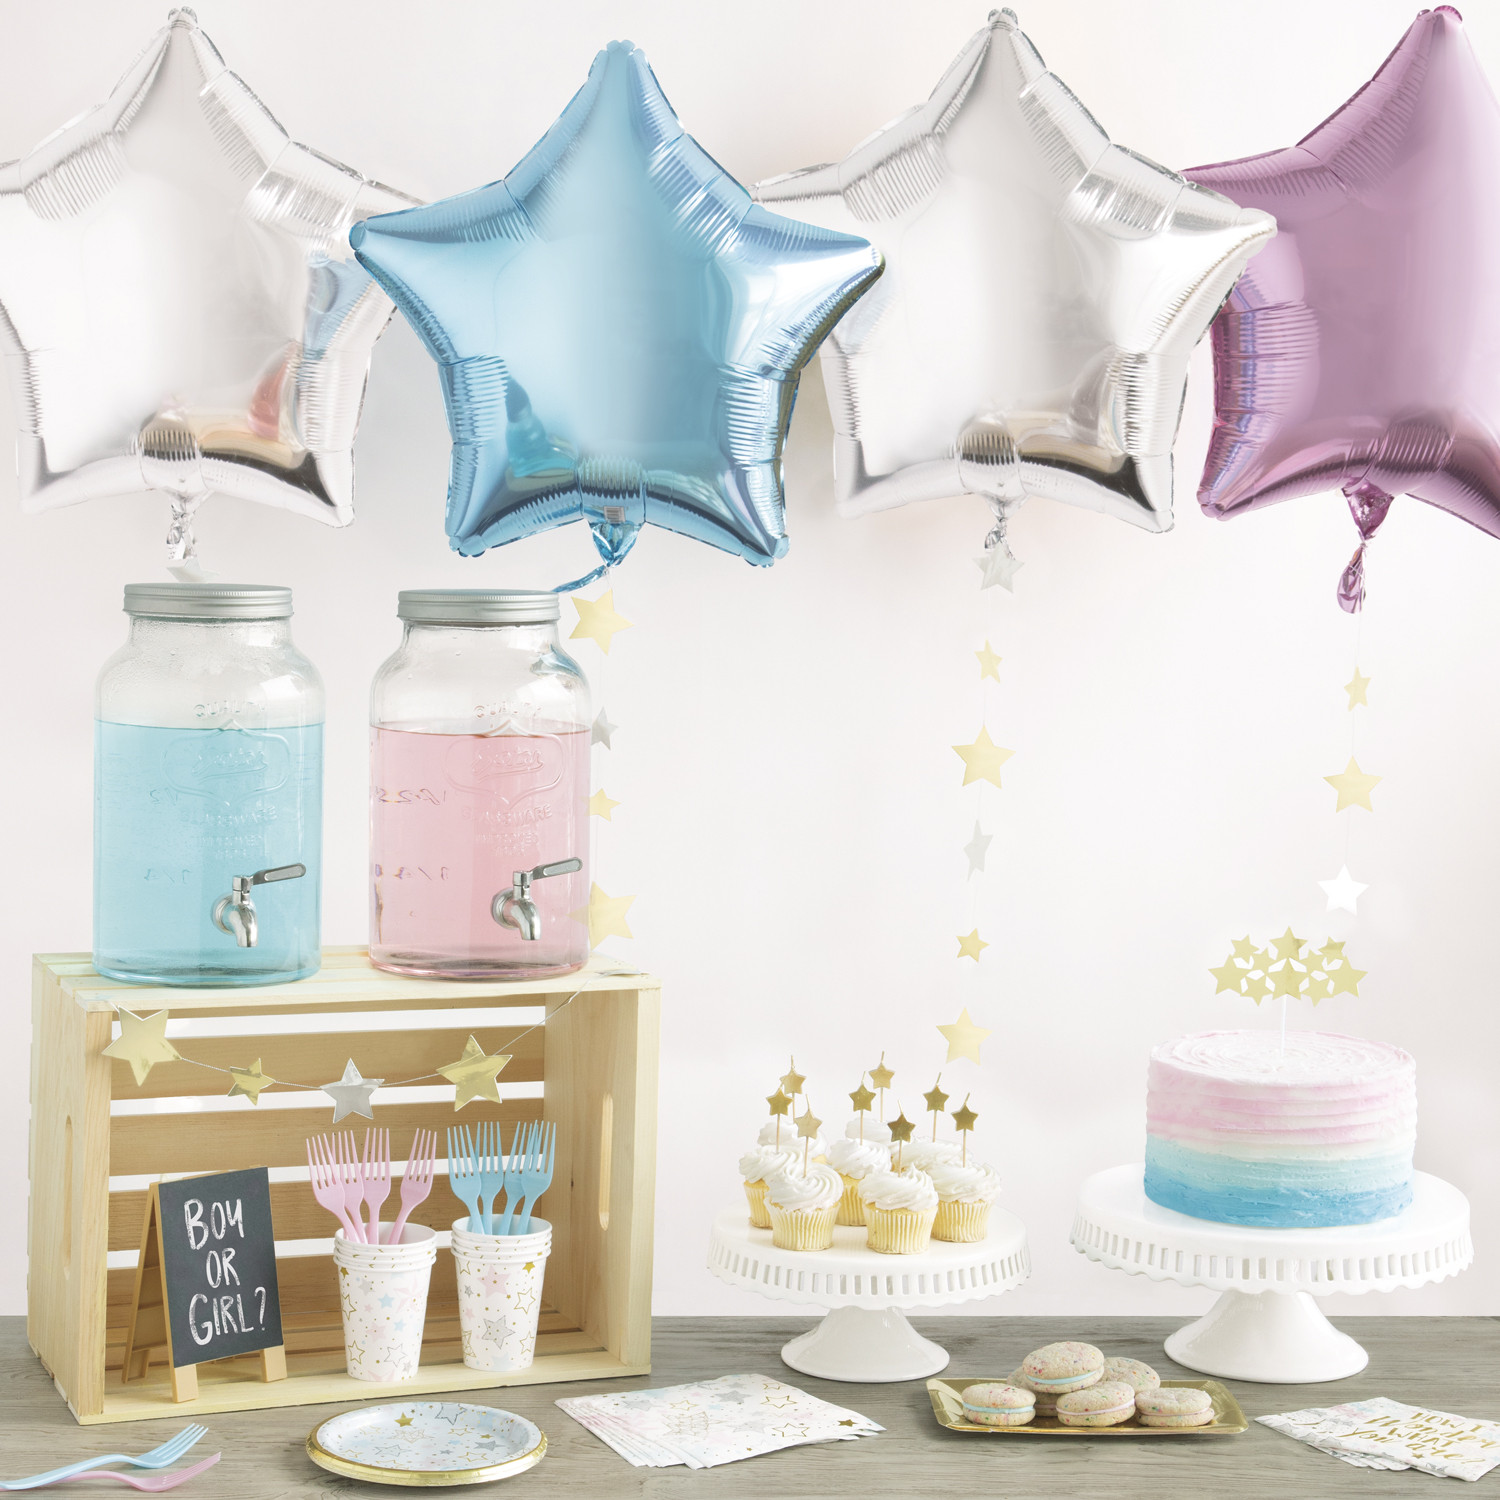 Gender Party Reveal Ideas
 Gender Reveal Party Ideas